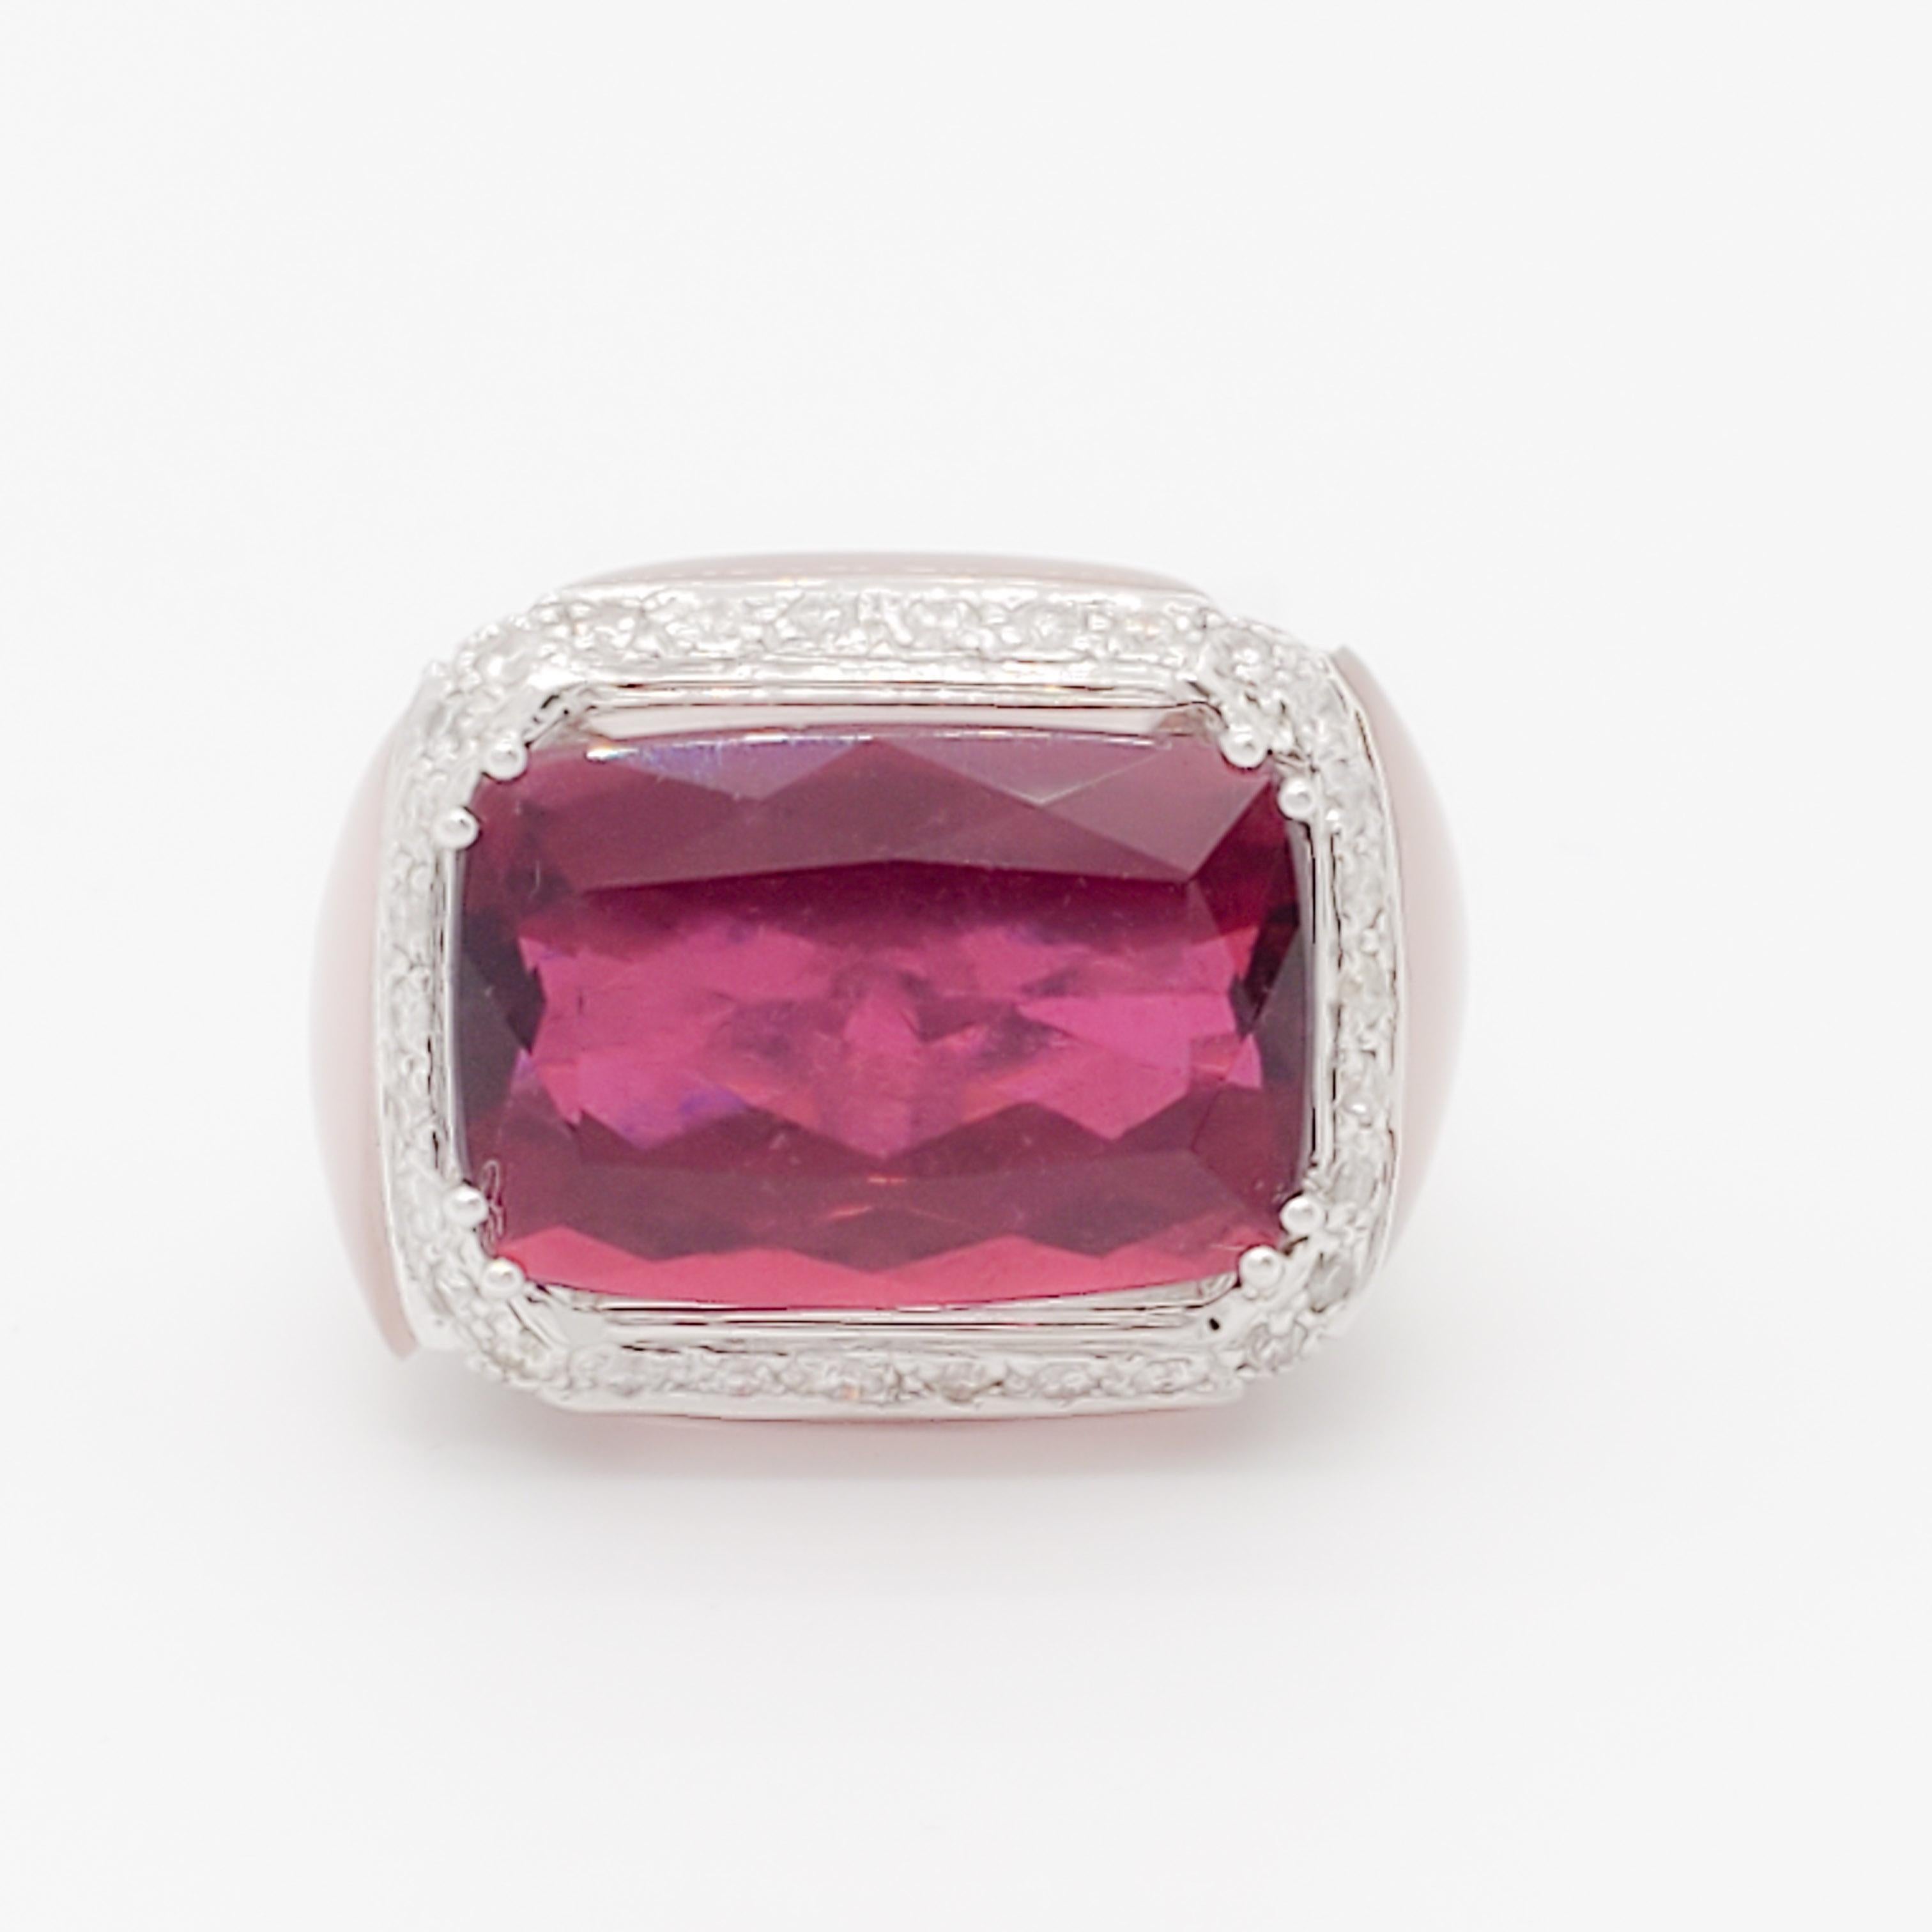 Gorgeous 13.46 ct. rubellite octagon with good quality white diamond rounds and rose quartz on the sides.  Handmade in 18k white gold.  Ring size 7.25.